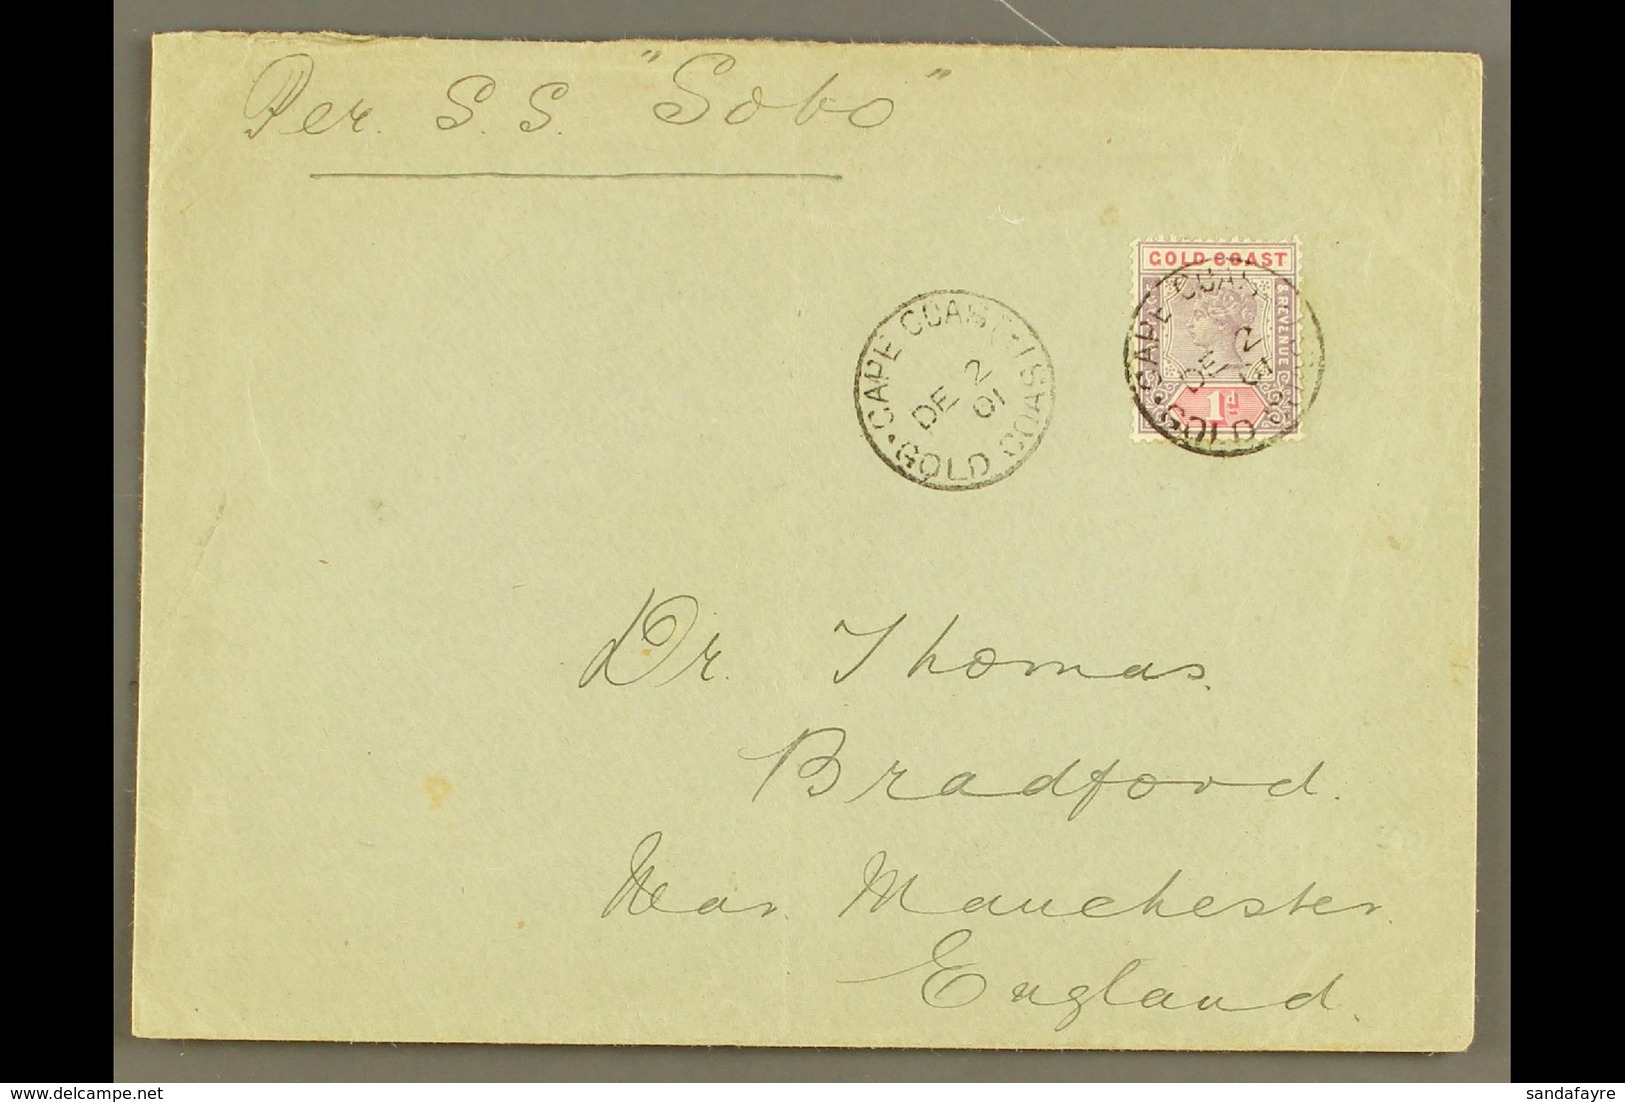 1901 (2 Dec) Cover Addressed To England, Endorsed "Per S.S. Soho", Bearing 1d QV Stamp Tied By "Cape Coast" Cds, Plus An - Gold Coast (...-1957)